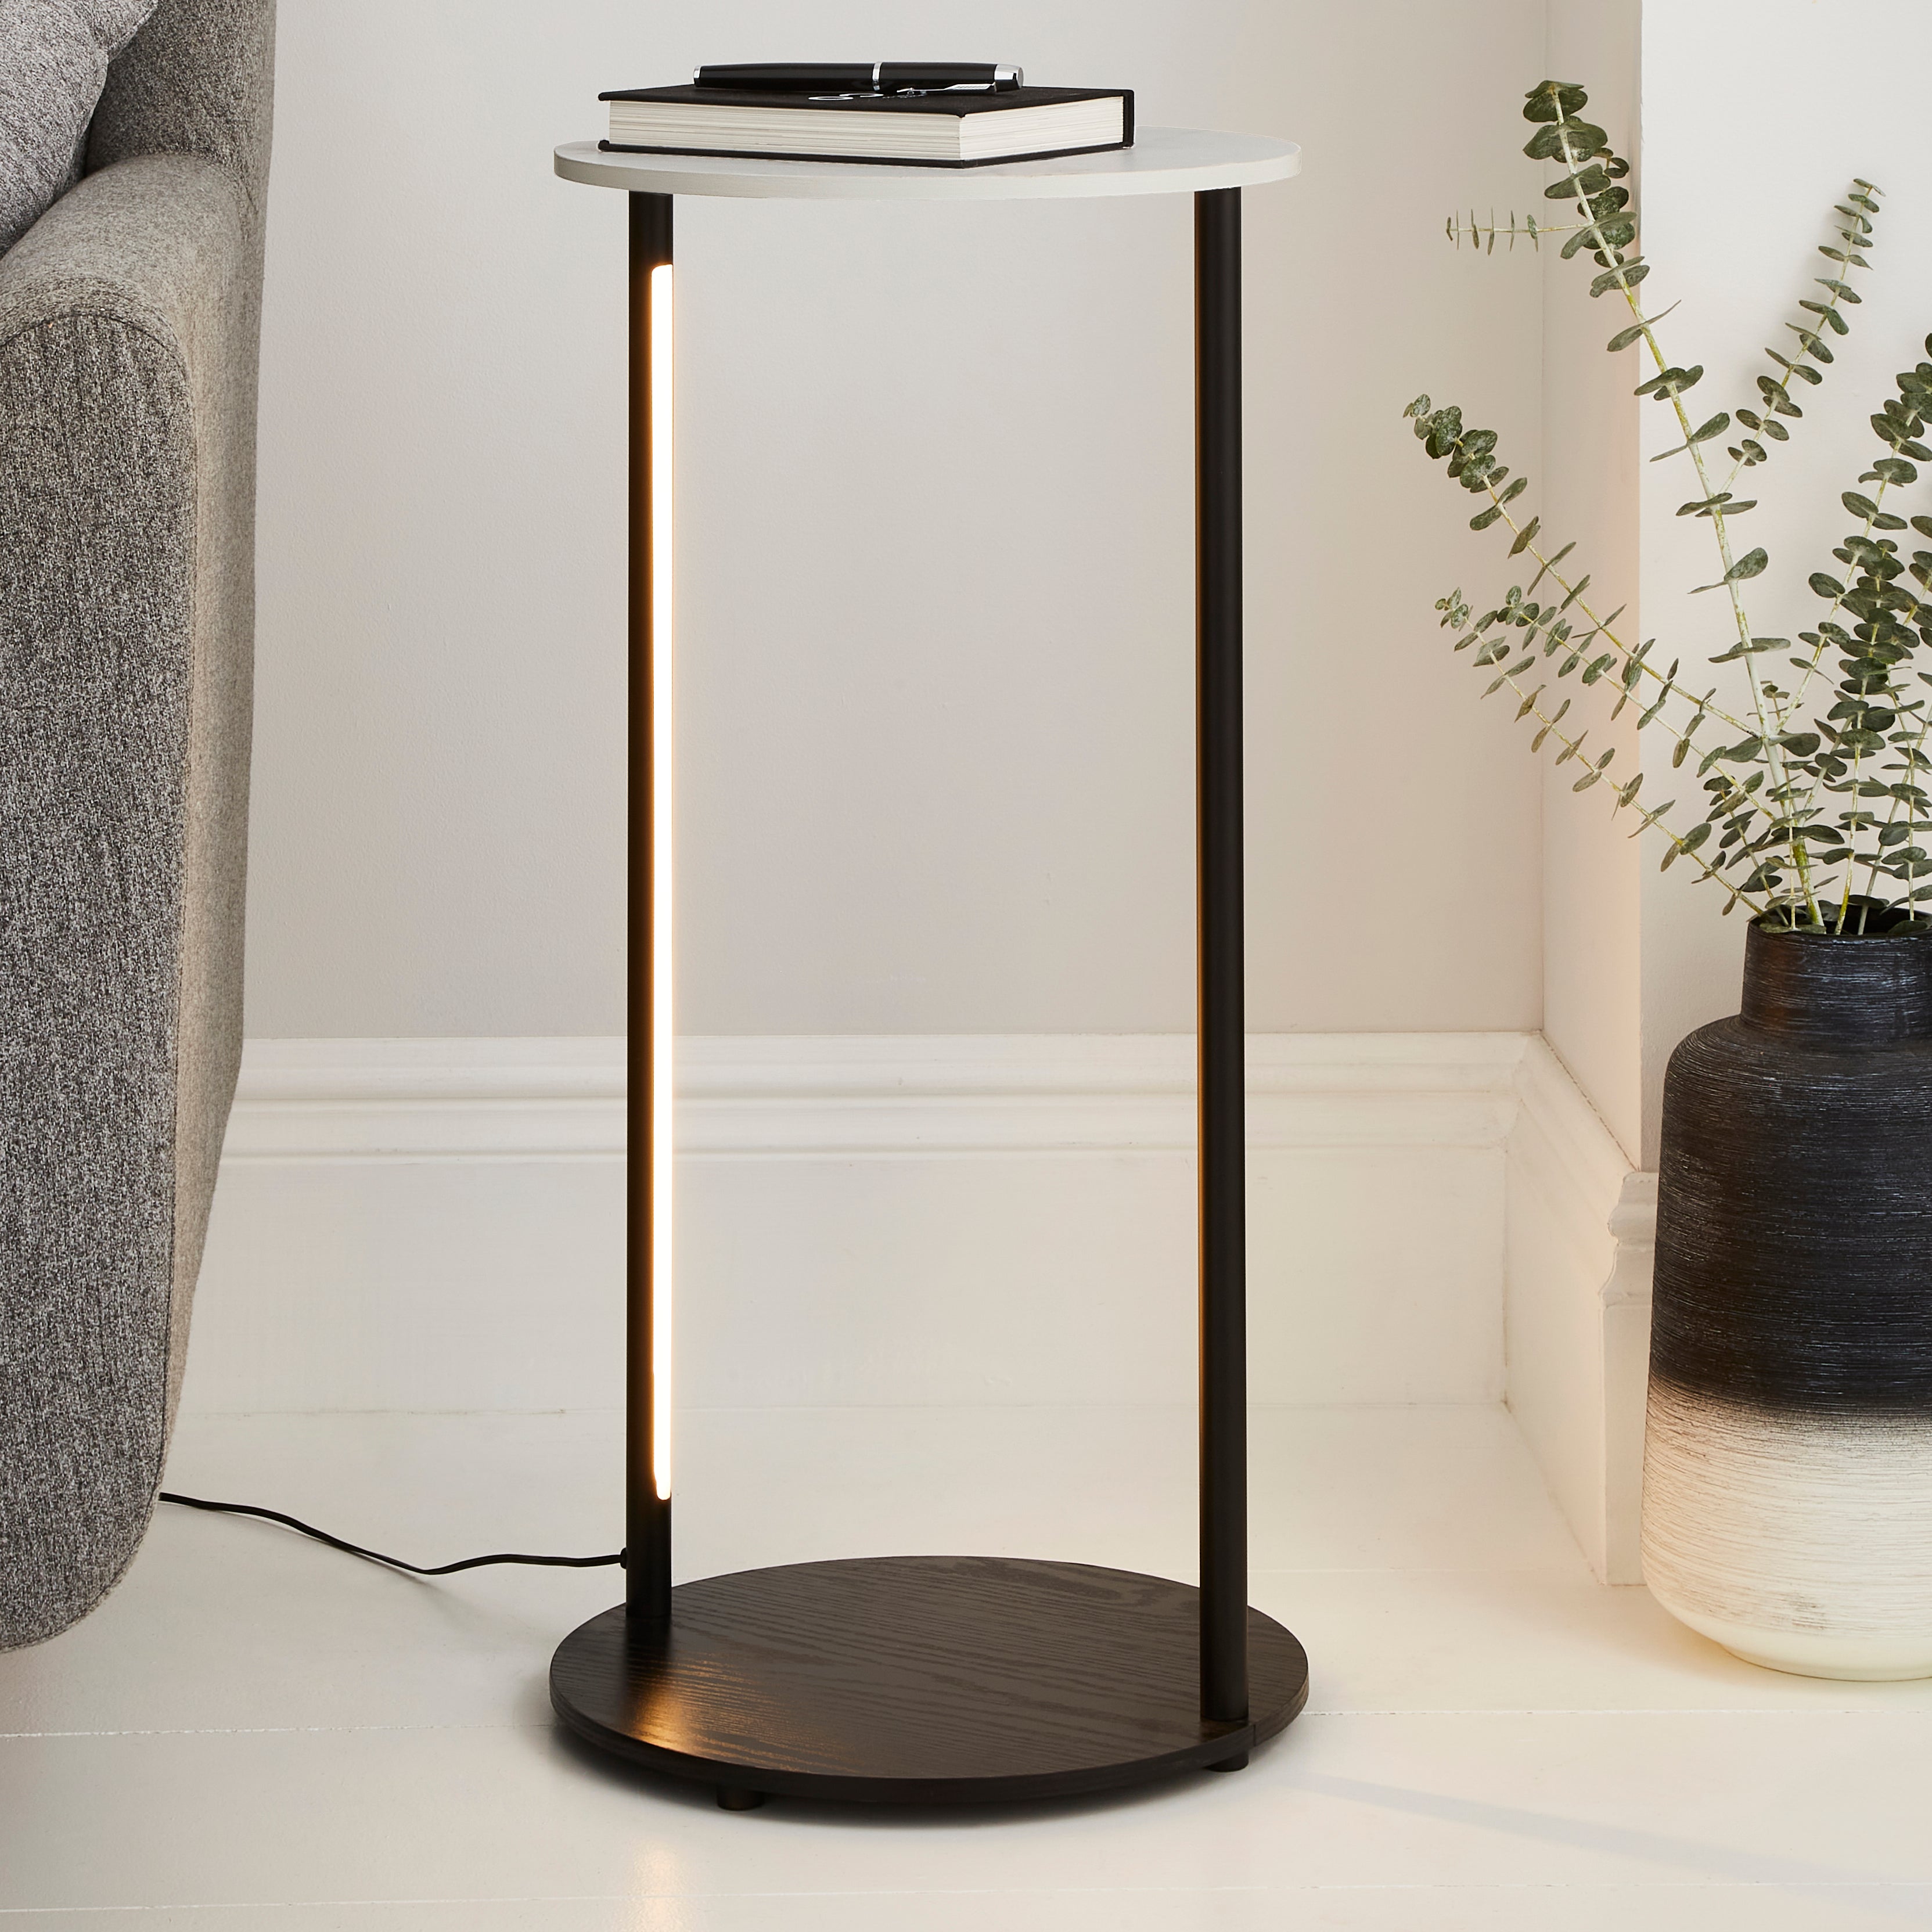 Aiko Side Table with 1 LED Light,  Black and Marble Effect